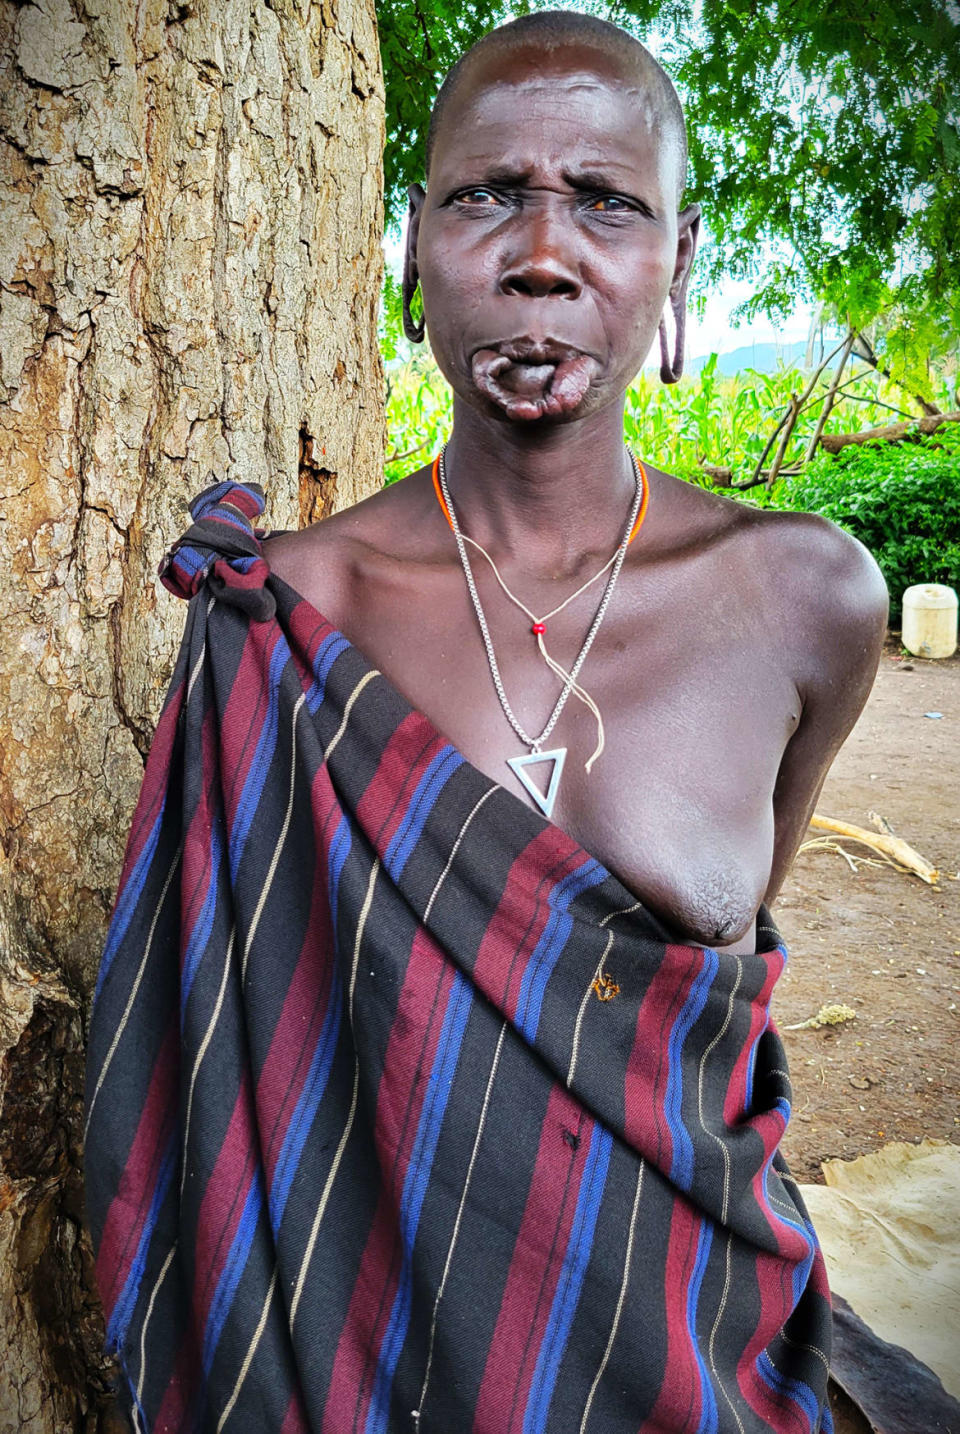 <div class="inline-image__caption"><p>A Mursi woman poses for a portrait without her lip plate.</p></div> <div class="inline-image__credit">Jody Ray</div>